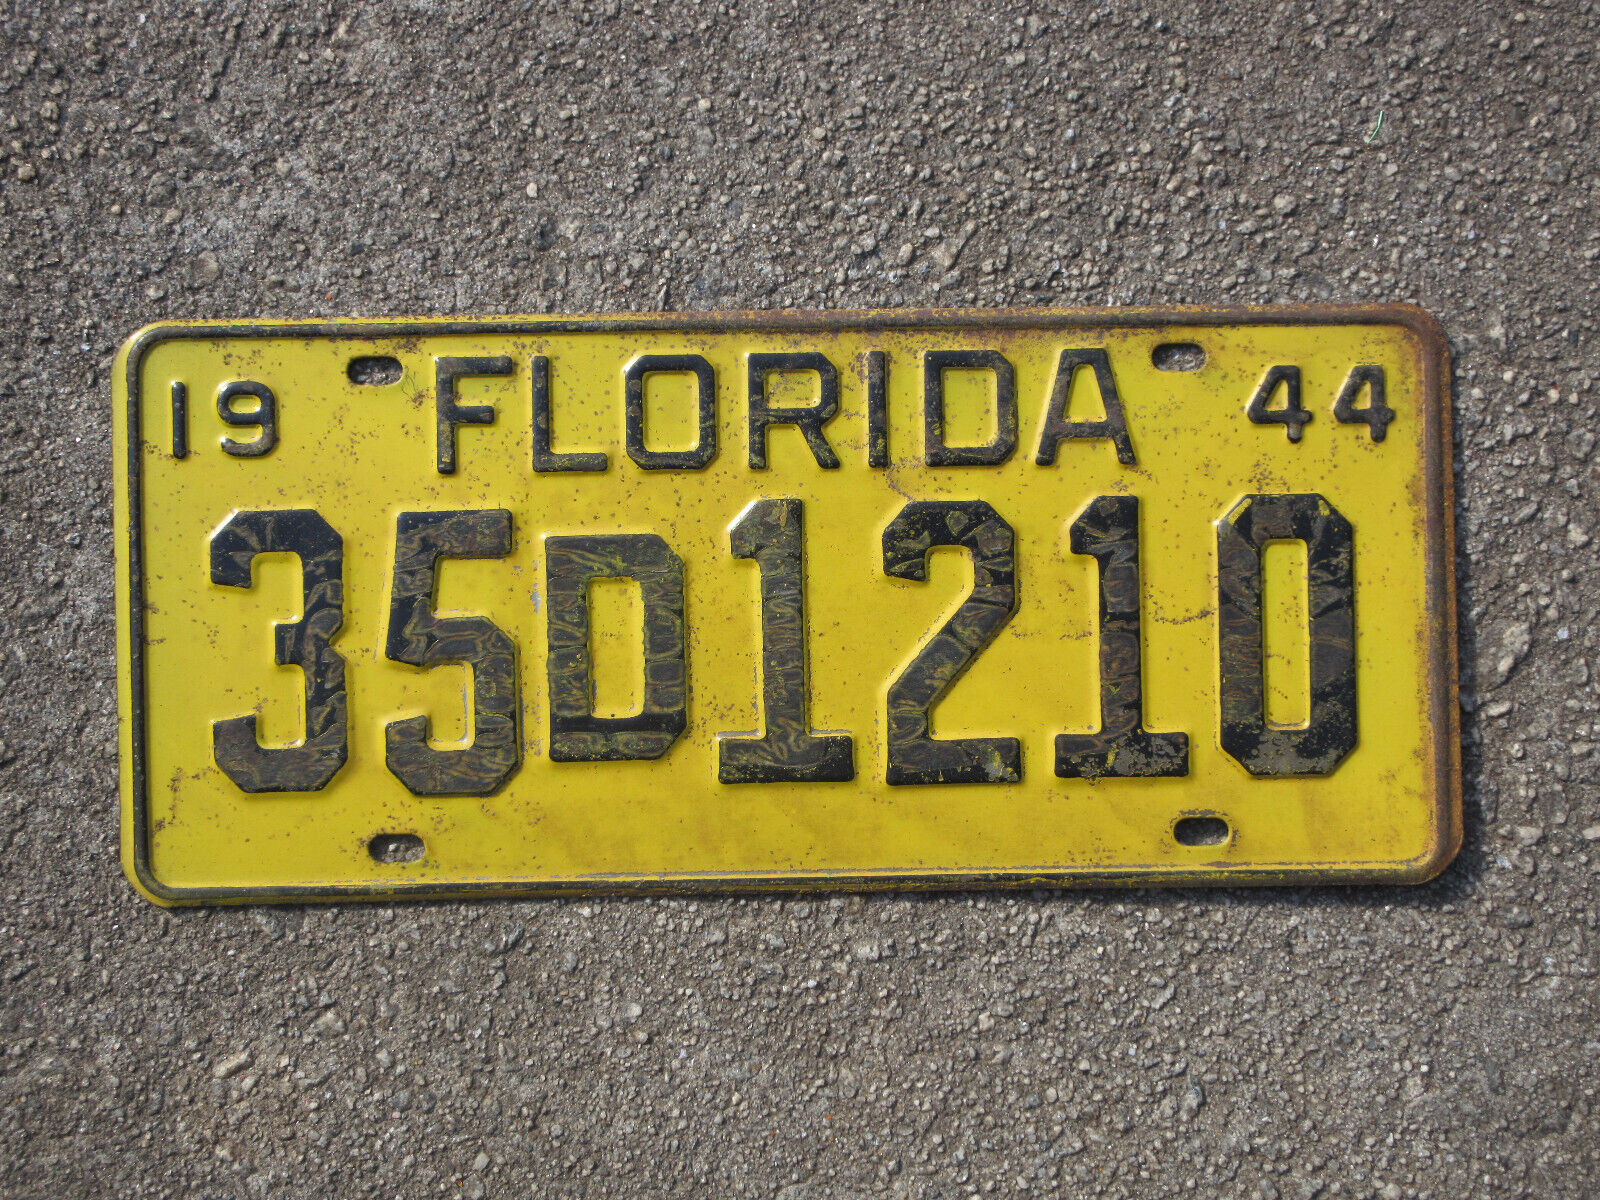 1944 Florida License Plate Chevy Chevrolet Ford 35D1210 Madison County FL FLA